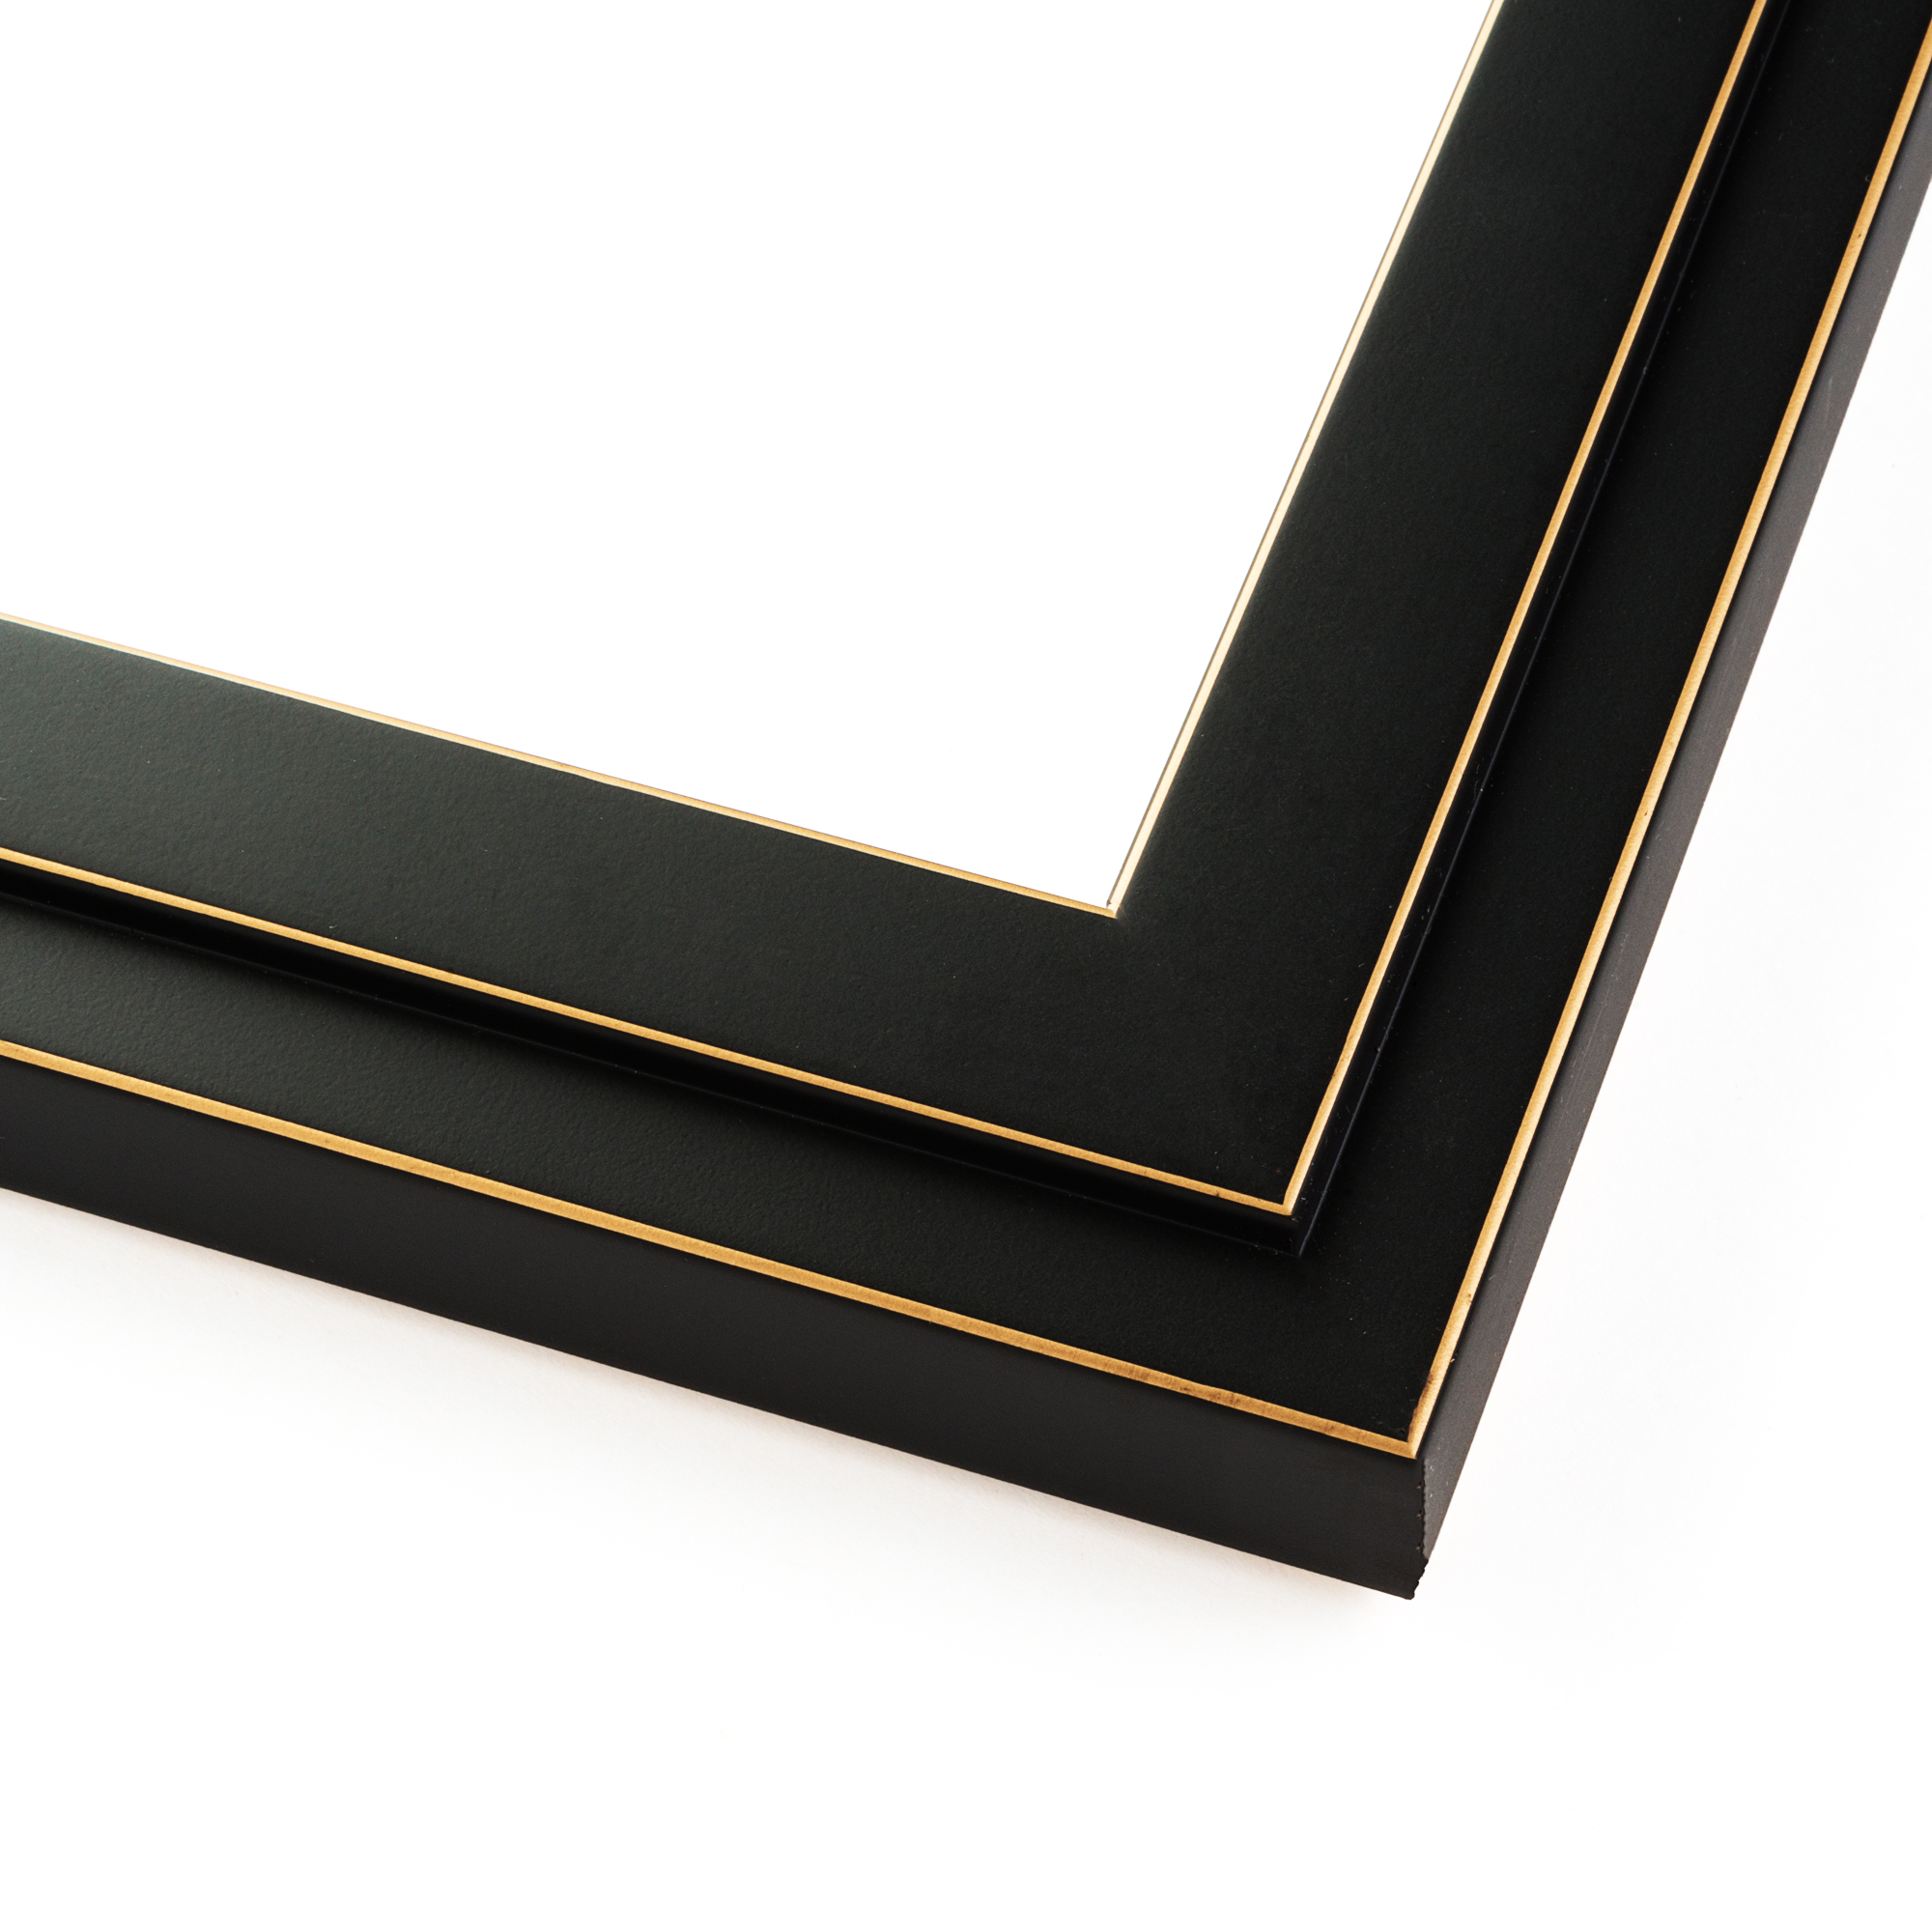 CustomPictureFrames.com 12x30 - 12 x 30 Black and Gold Pinstripe Solid Wood Frame with UV Framer's Acrylic & Foam Board Backing - Great For